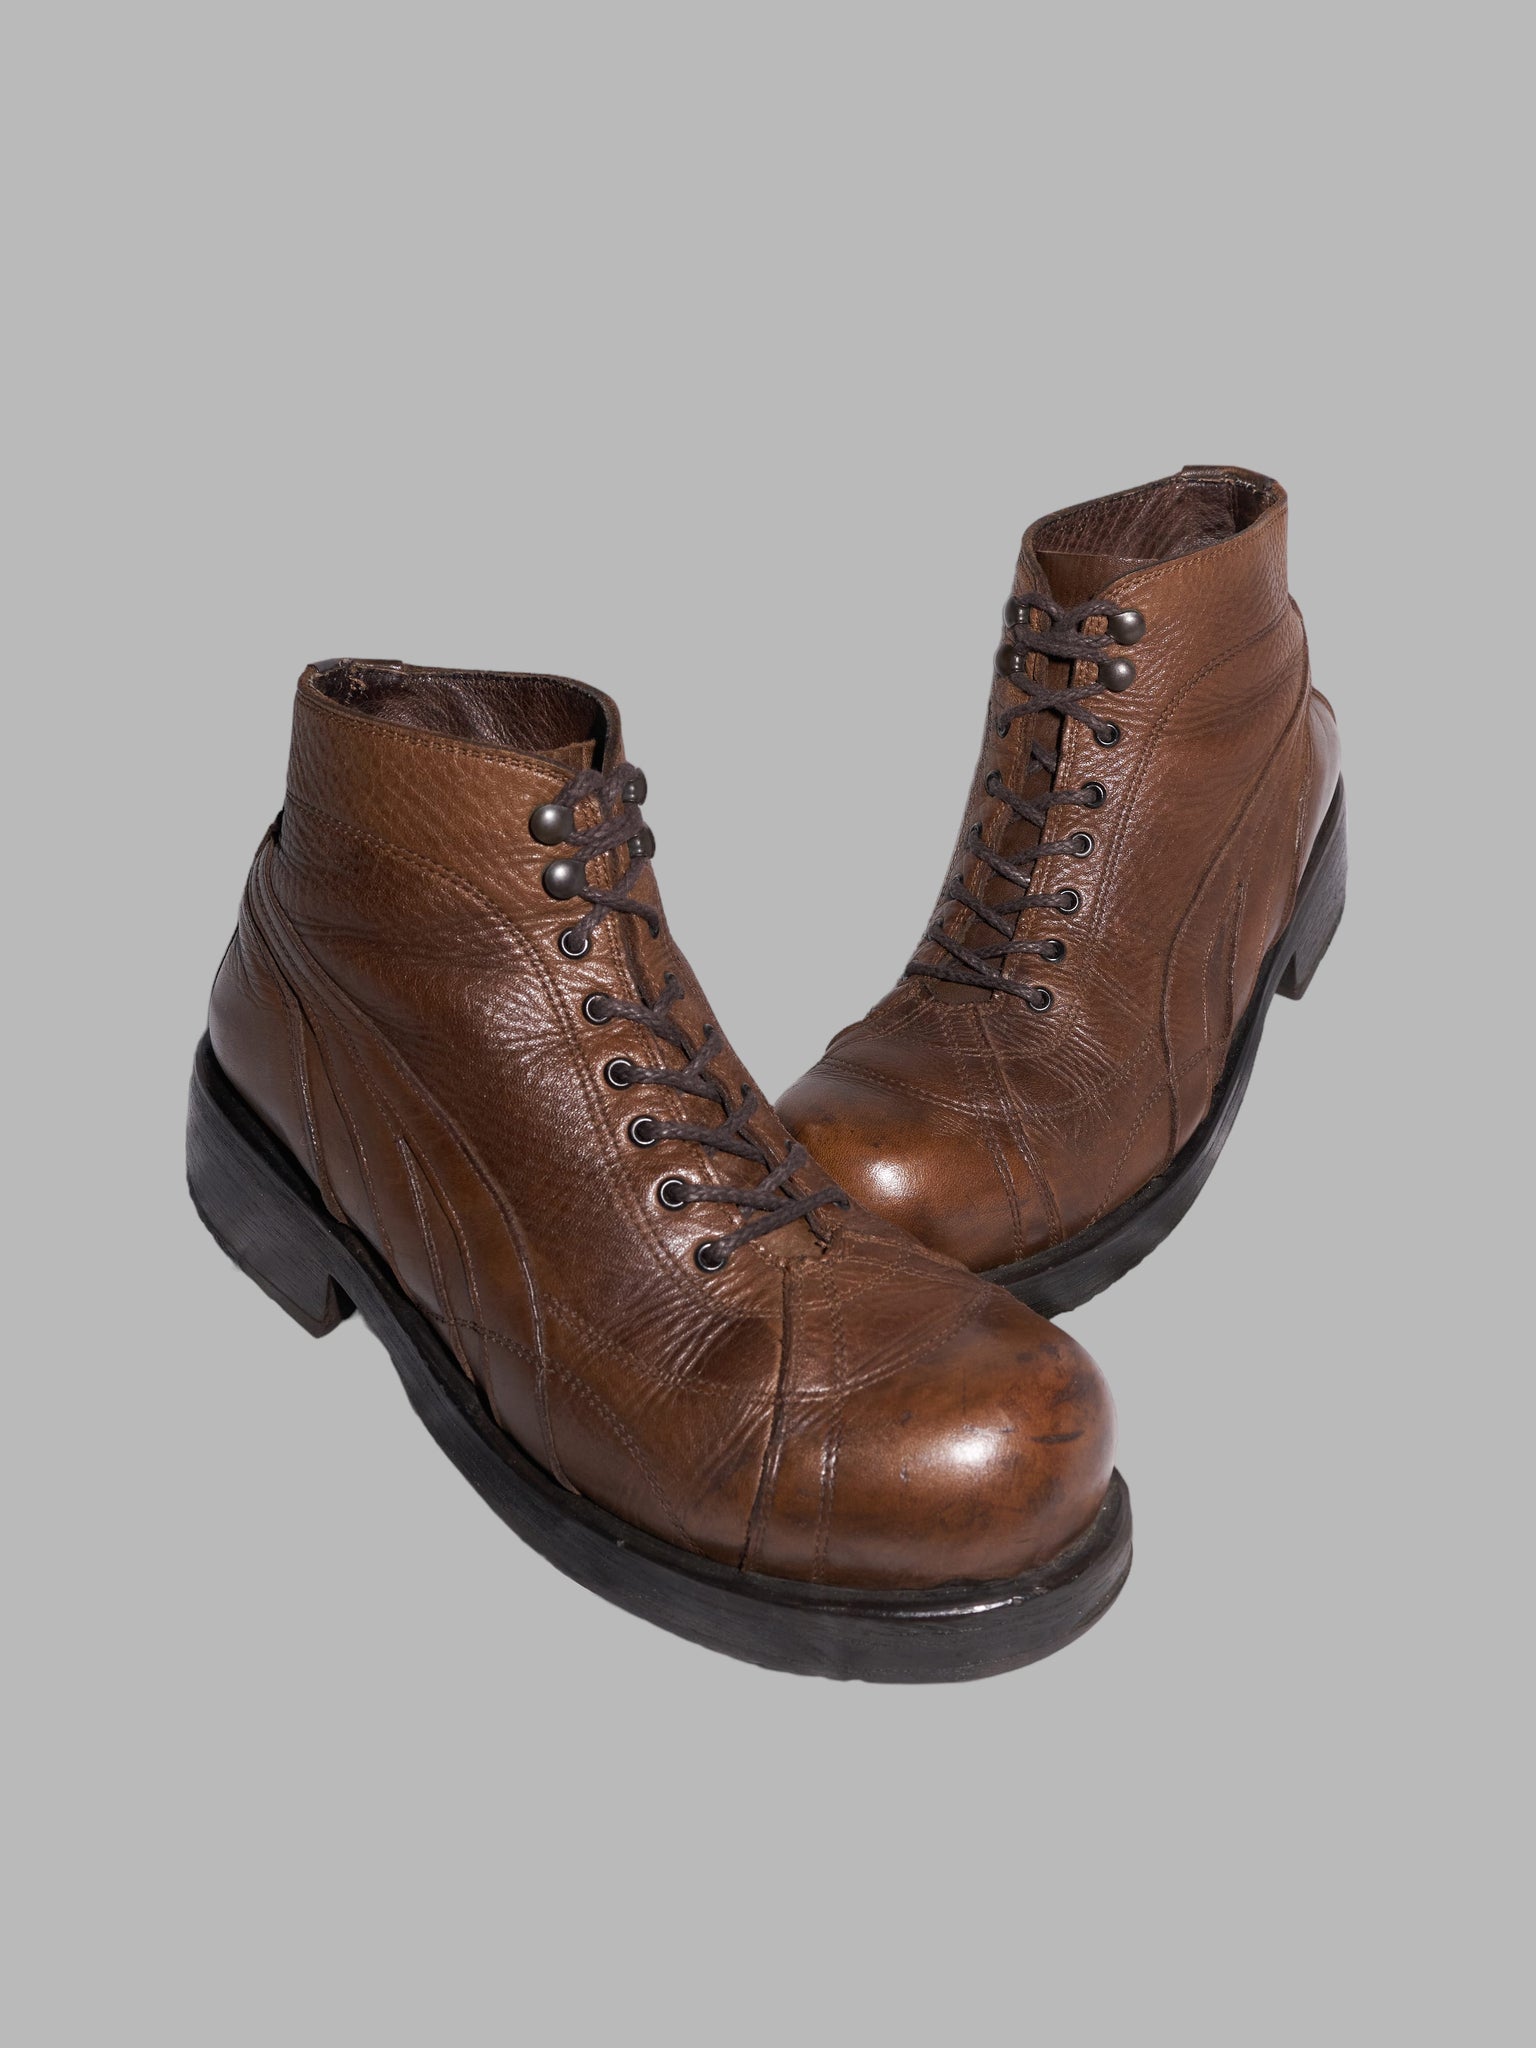 Gova belgium brown leather round toe army boots - size 42 US 9 Dirk Bikkembergs